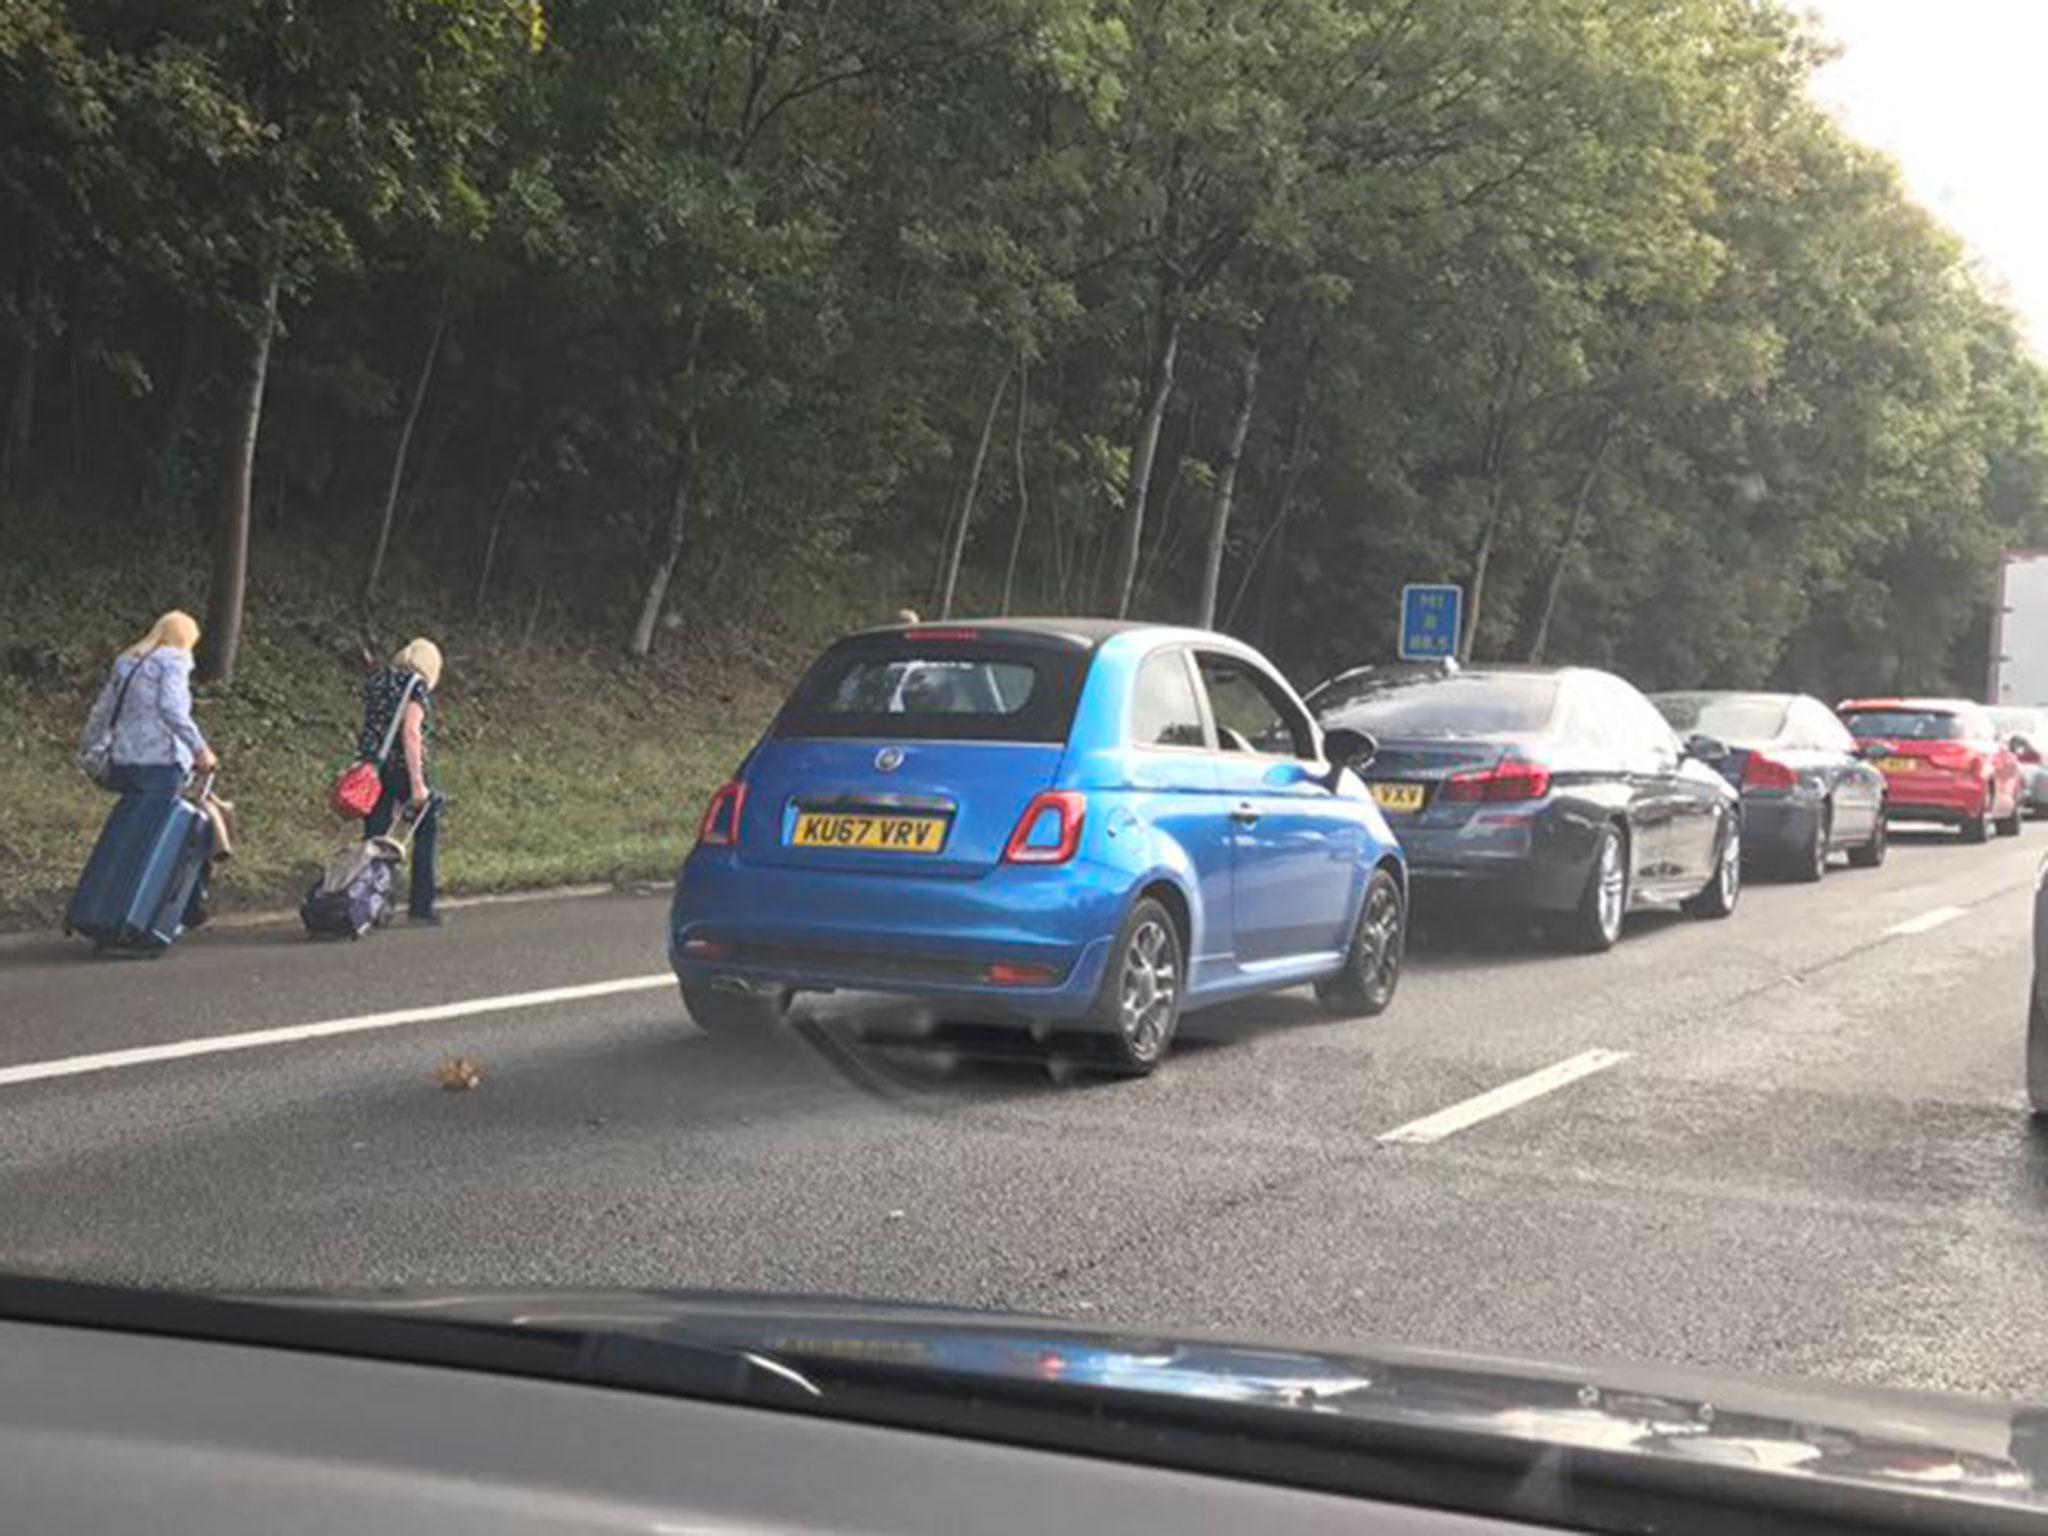 Photos shared on social media showed long traffic queues and people walking along the hard shoulder with their suitcases